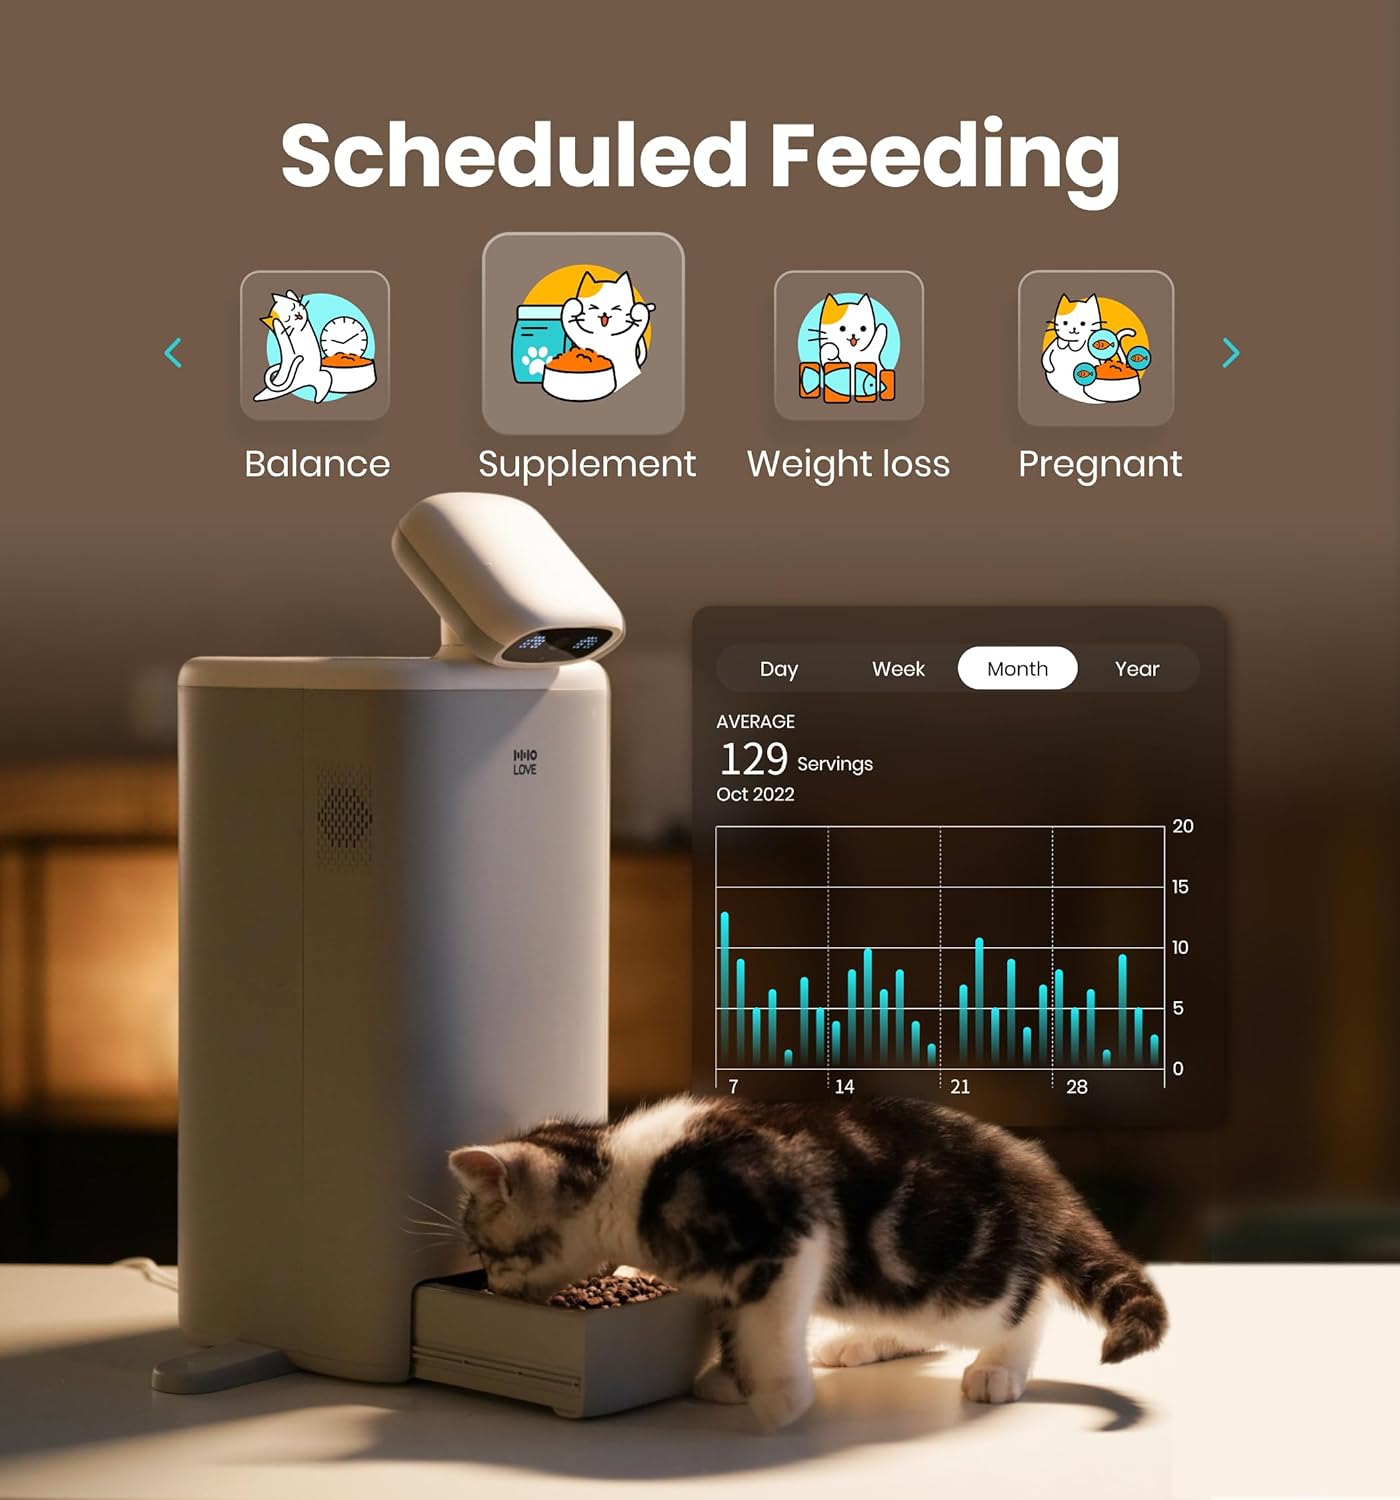 HHOLOVE 360Cat Camera with Automatic Feeder, 1080P HD Pet Camera with Cat Food Dispenser, 5G WiFi with APP Control for Remote Feeding, 2 Way Audio, Laser, AI